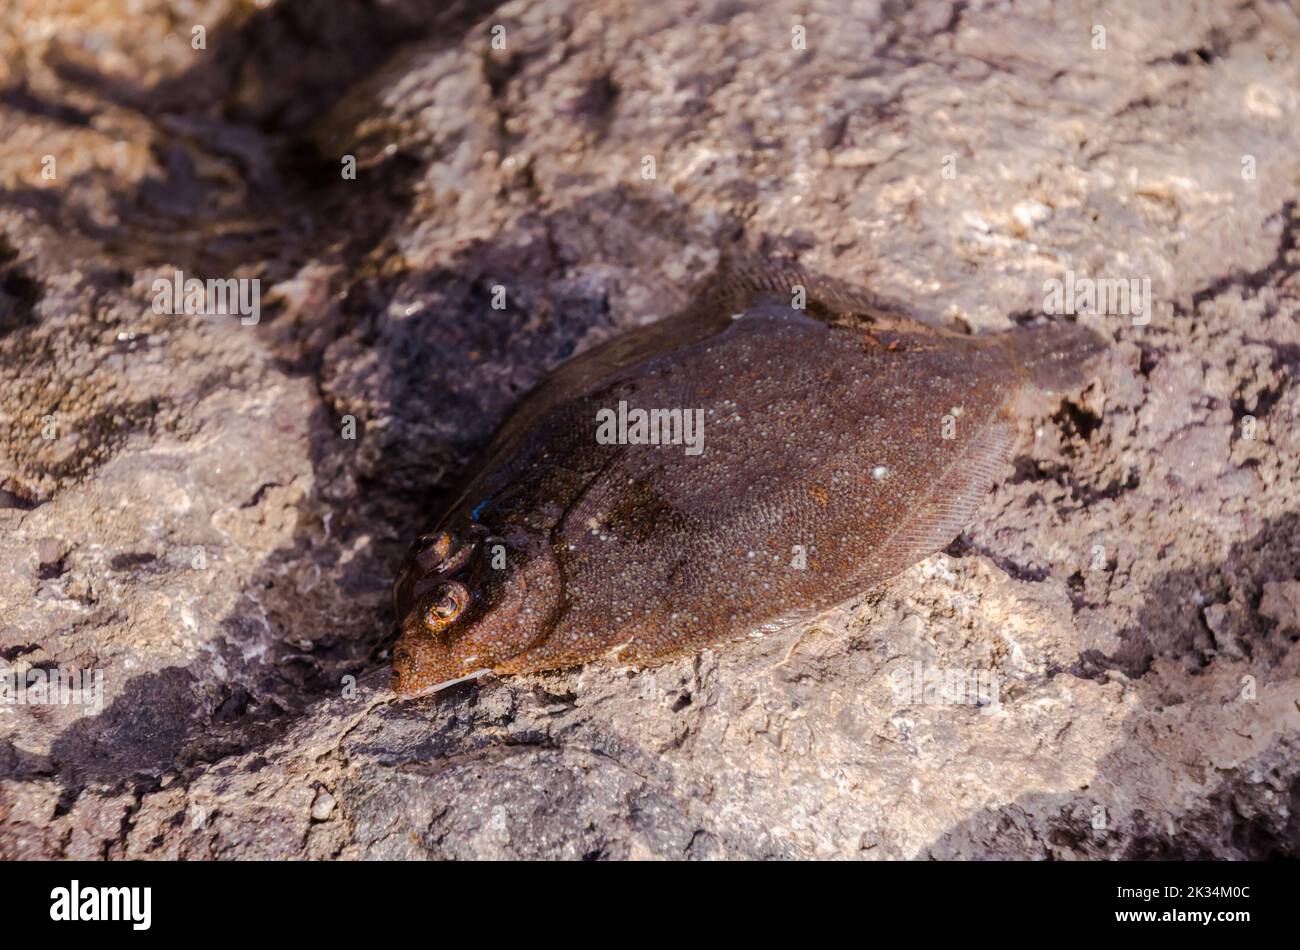 A closeup shot of an English sole fish on rocky surface Stock Photo